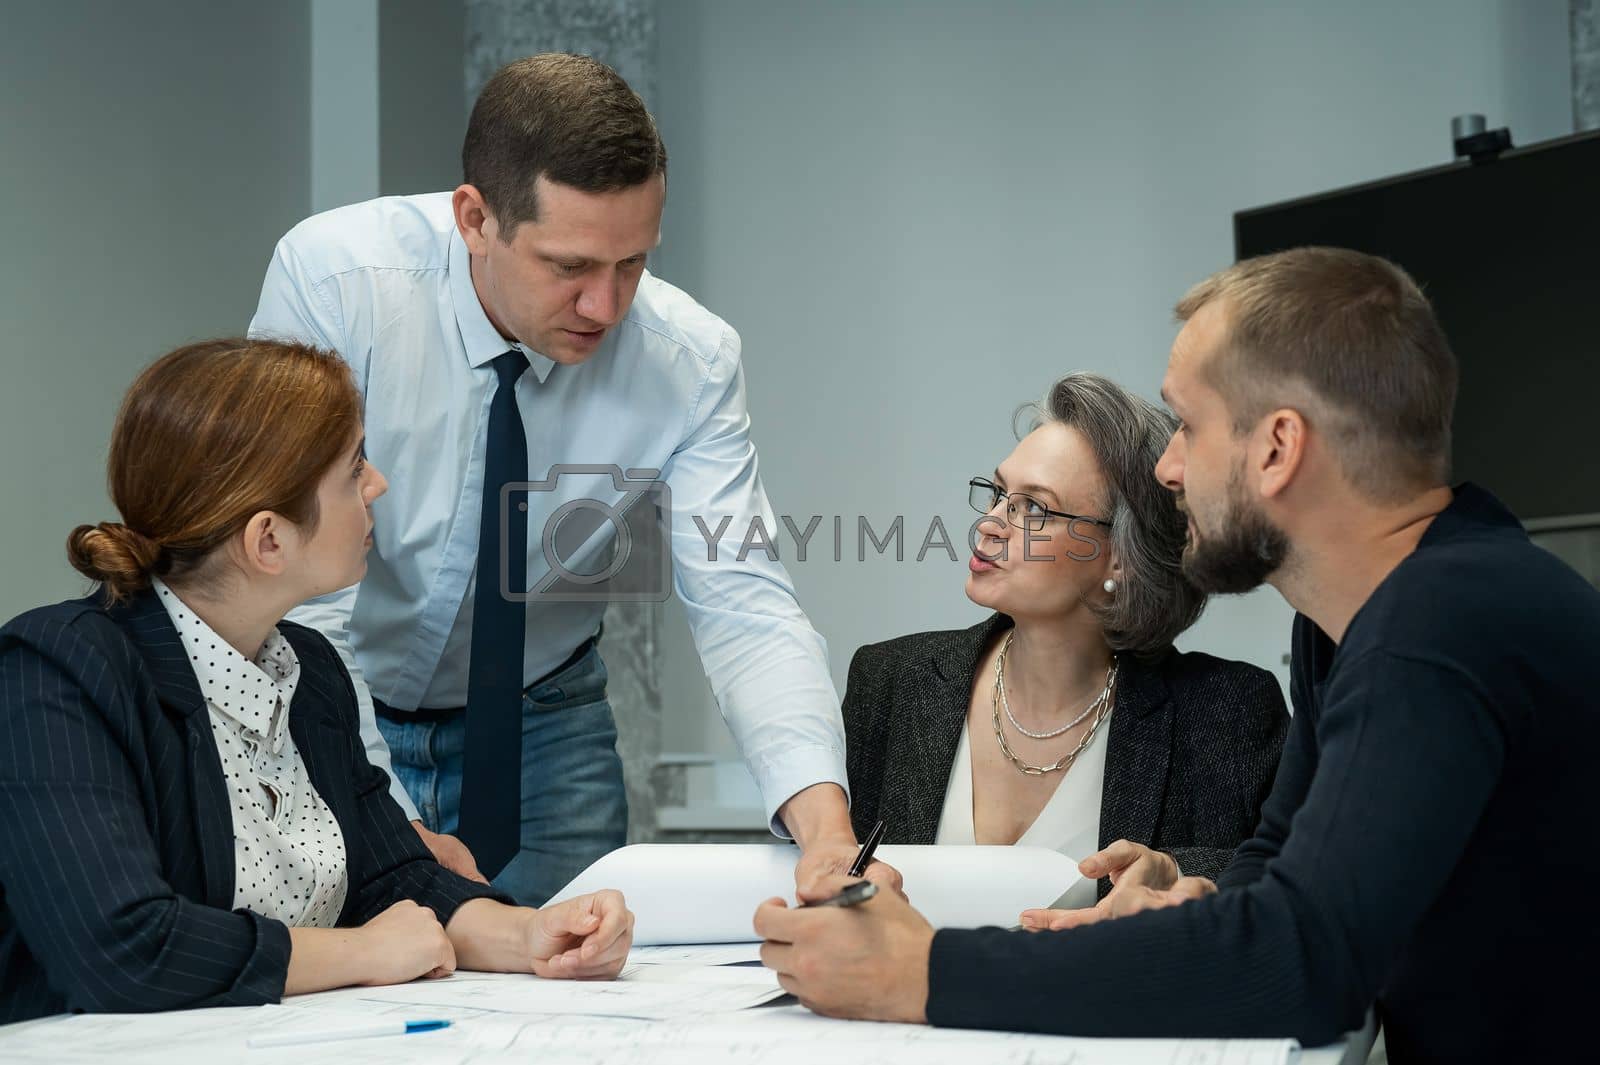 Royalty free image of The boss gives instructions to three employees in the office conference room. Brainstorming engineers and architects. by mrwed54